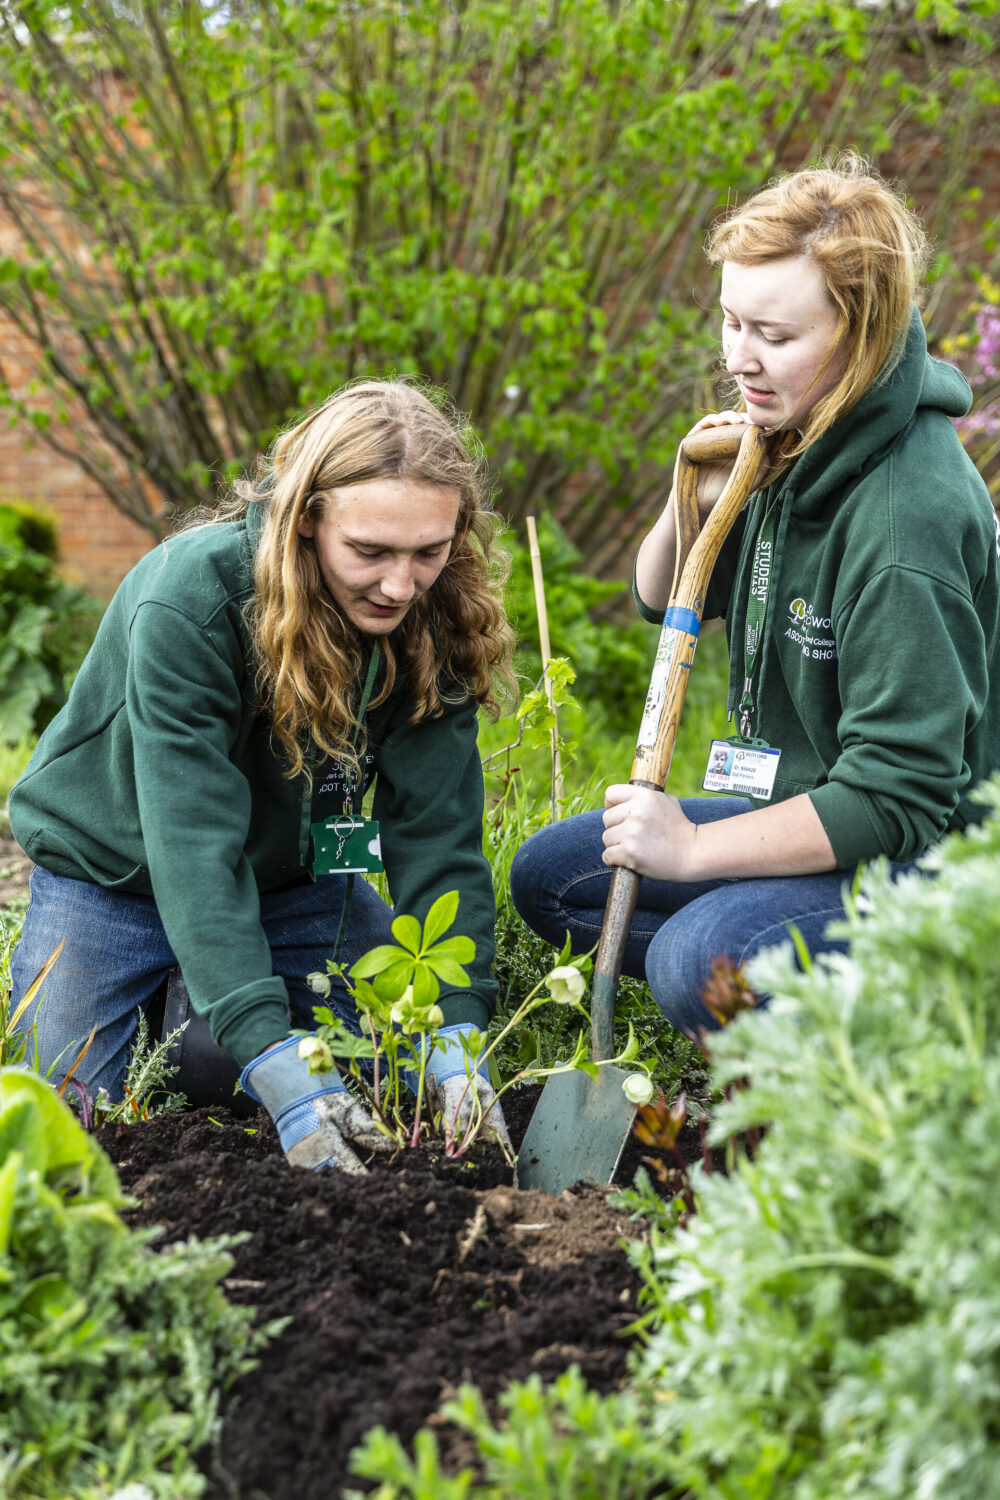 Shuttleworth College Horticulture Students